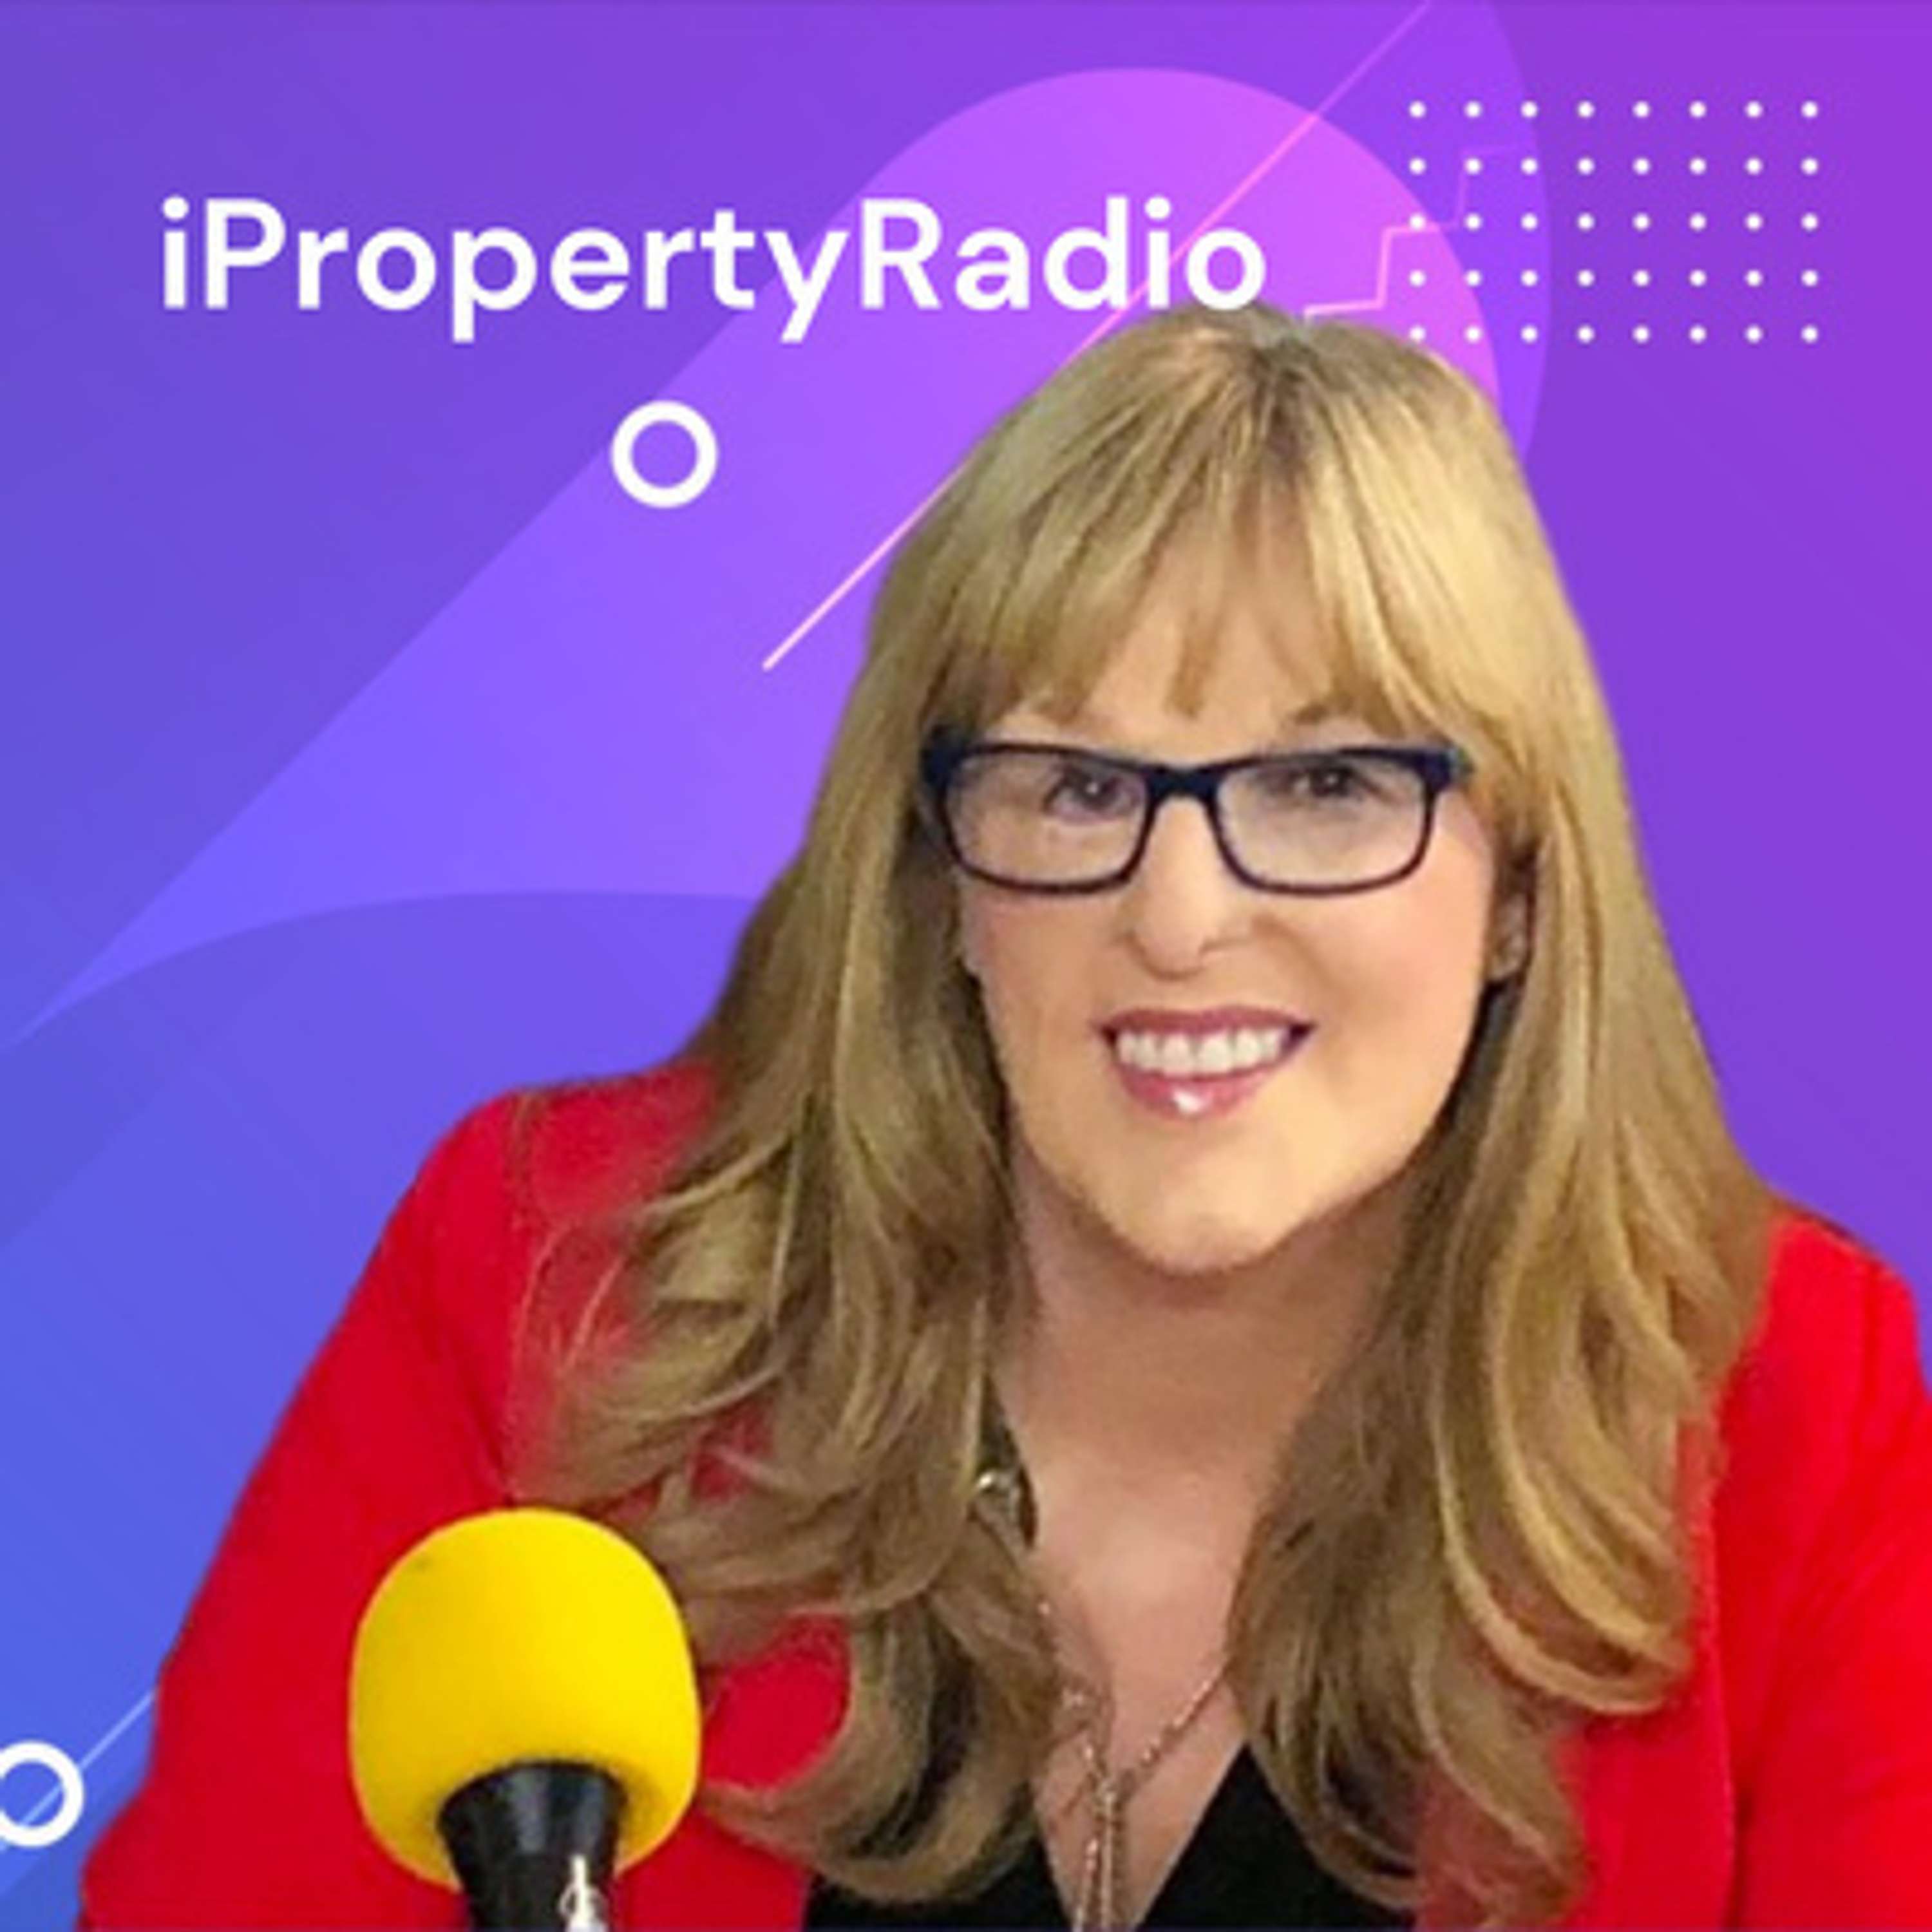 Ep.44 iPropertyRadio: Property Matter with Collen Construction, December 3rd 2019